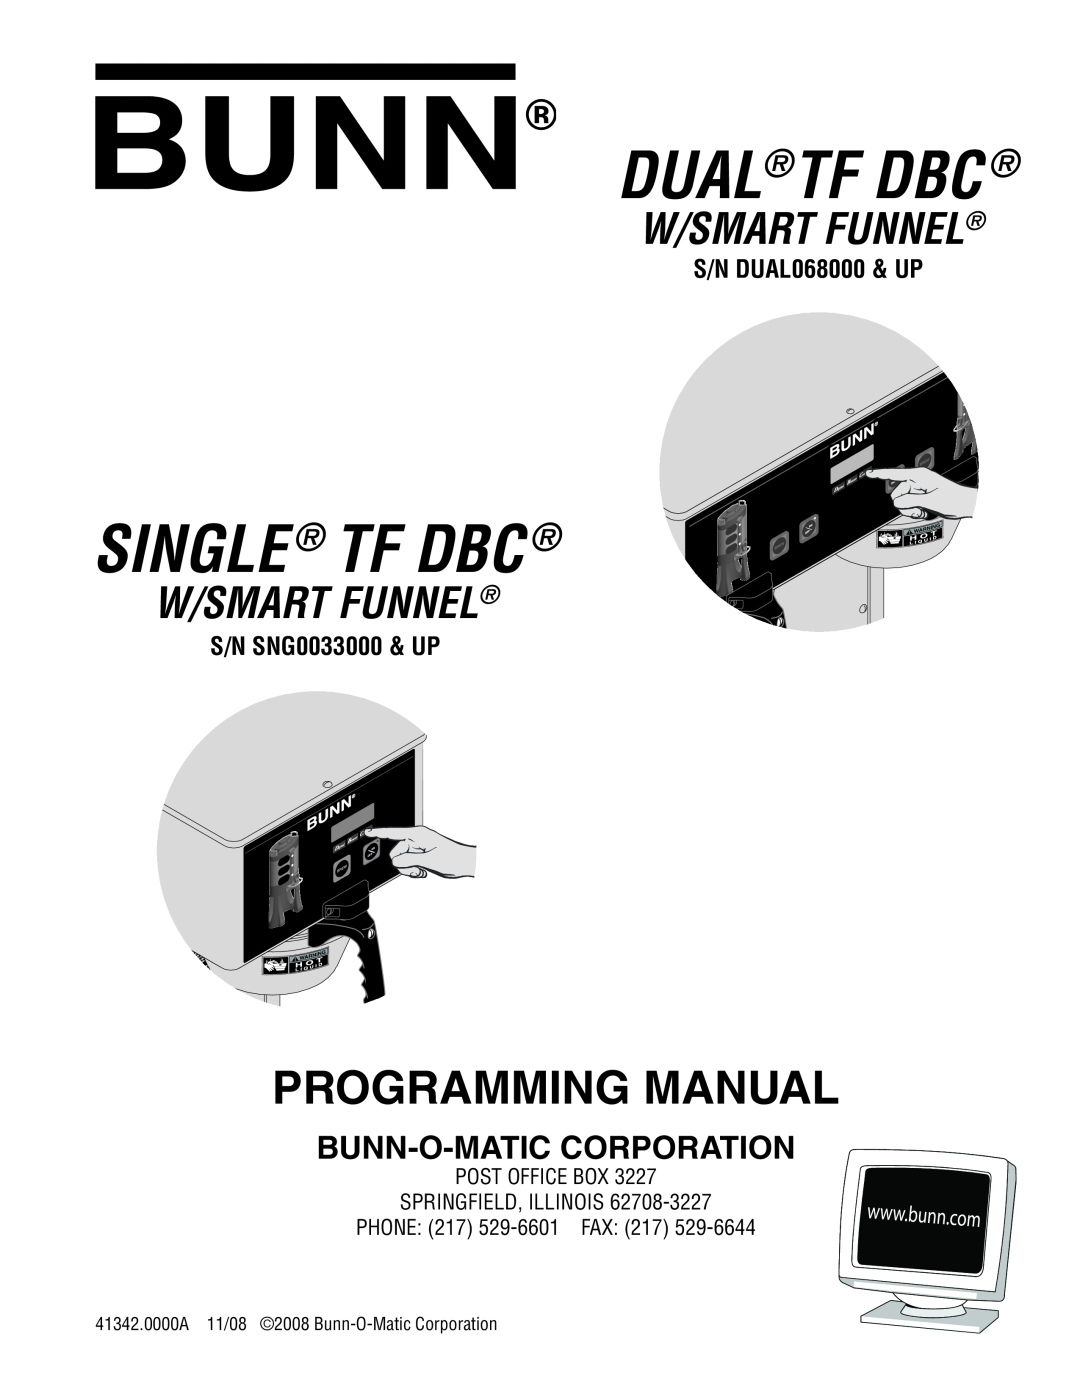 Bunn manual S/N DUAL068000 & UP, Dualtf Dbc, Installation & Operating Guide, With Smart Funnel, Bunn-O-Maticcorporation 